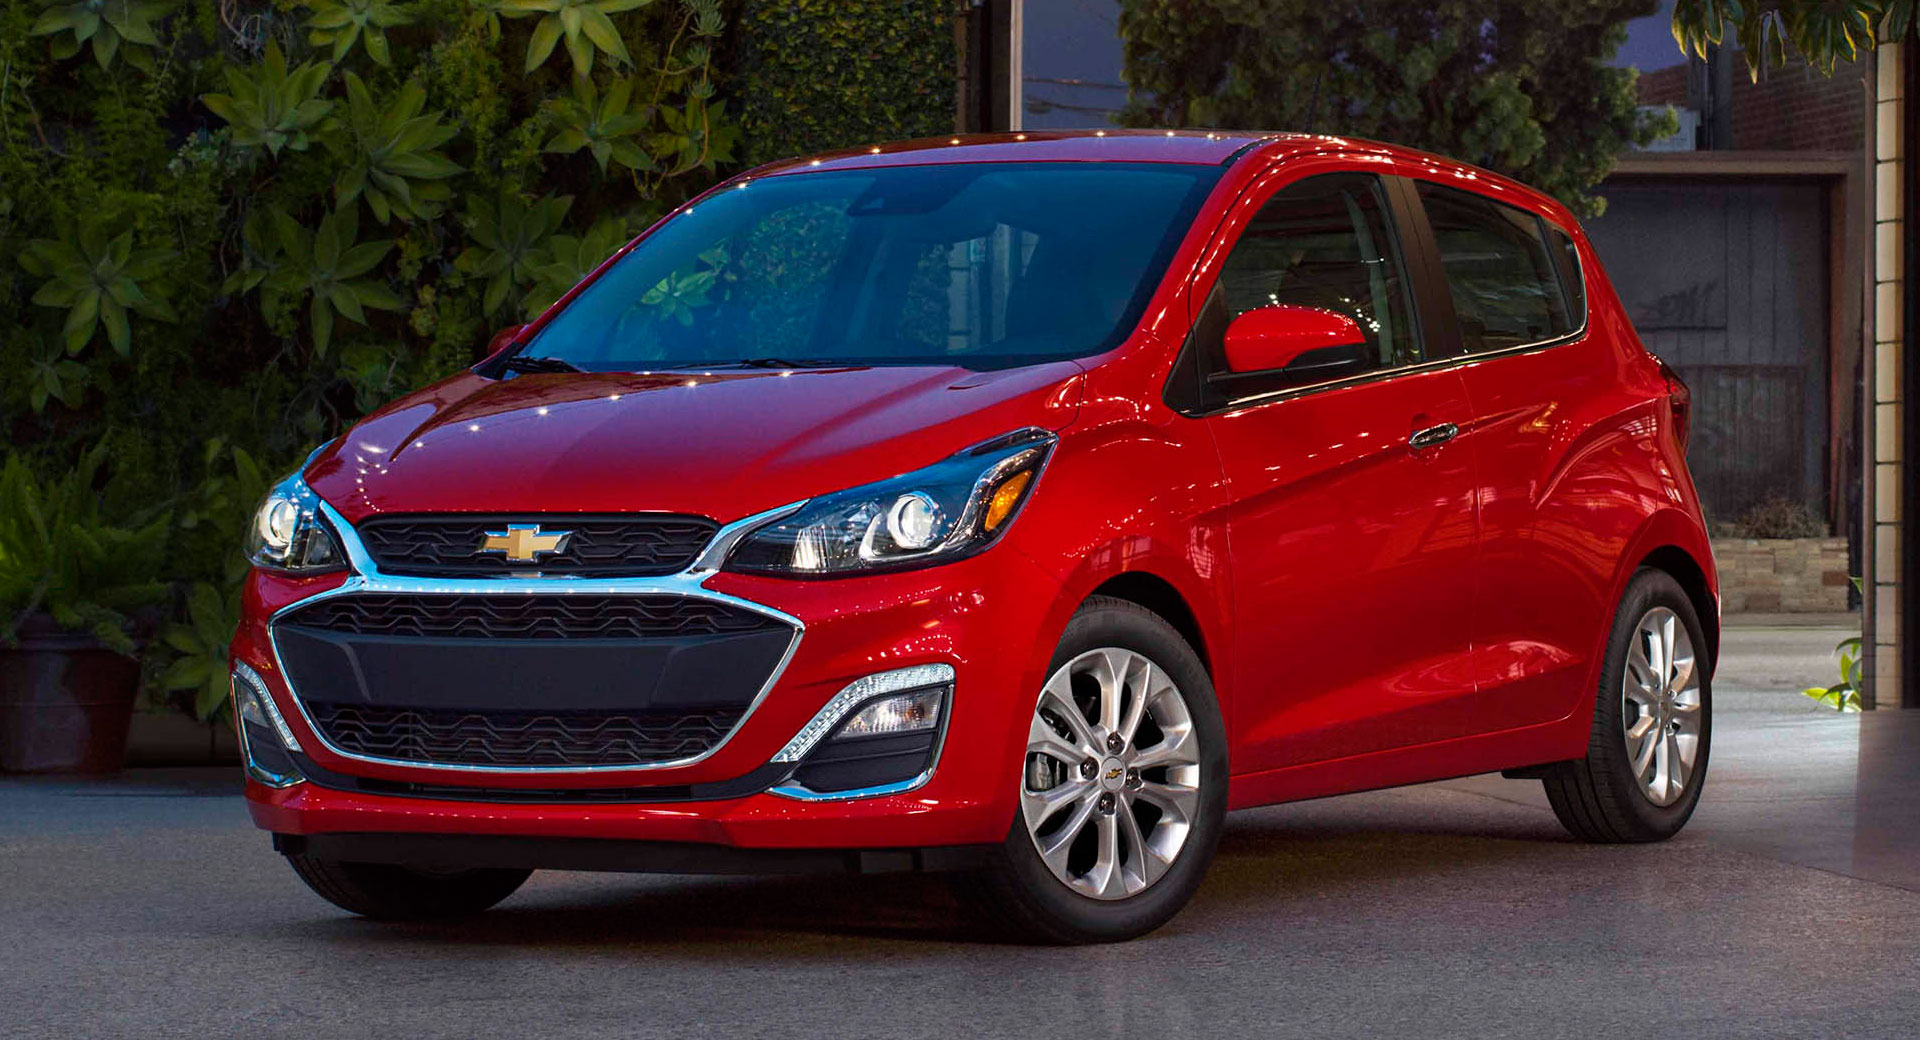 GM Is Killing The Chevy Spark This Summer After It Failed To Ignite